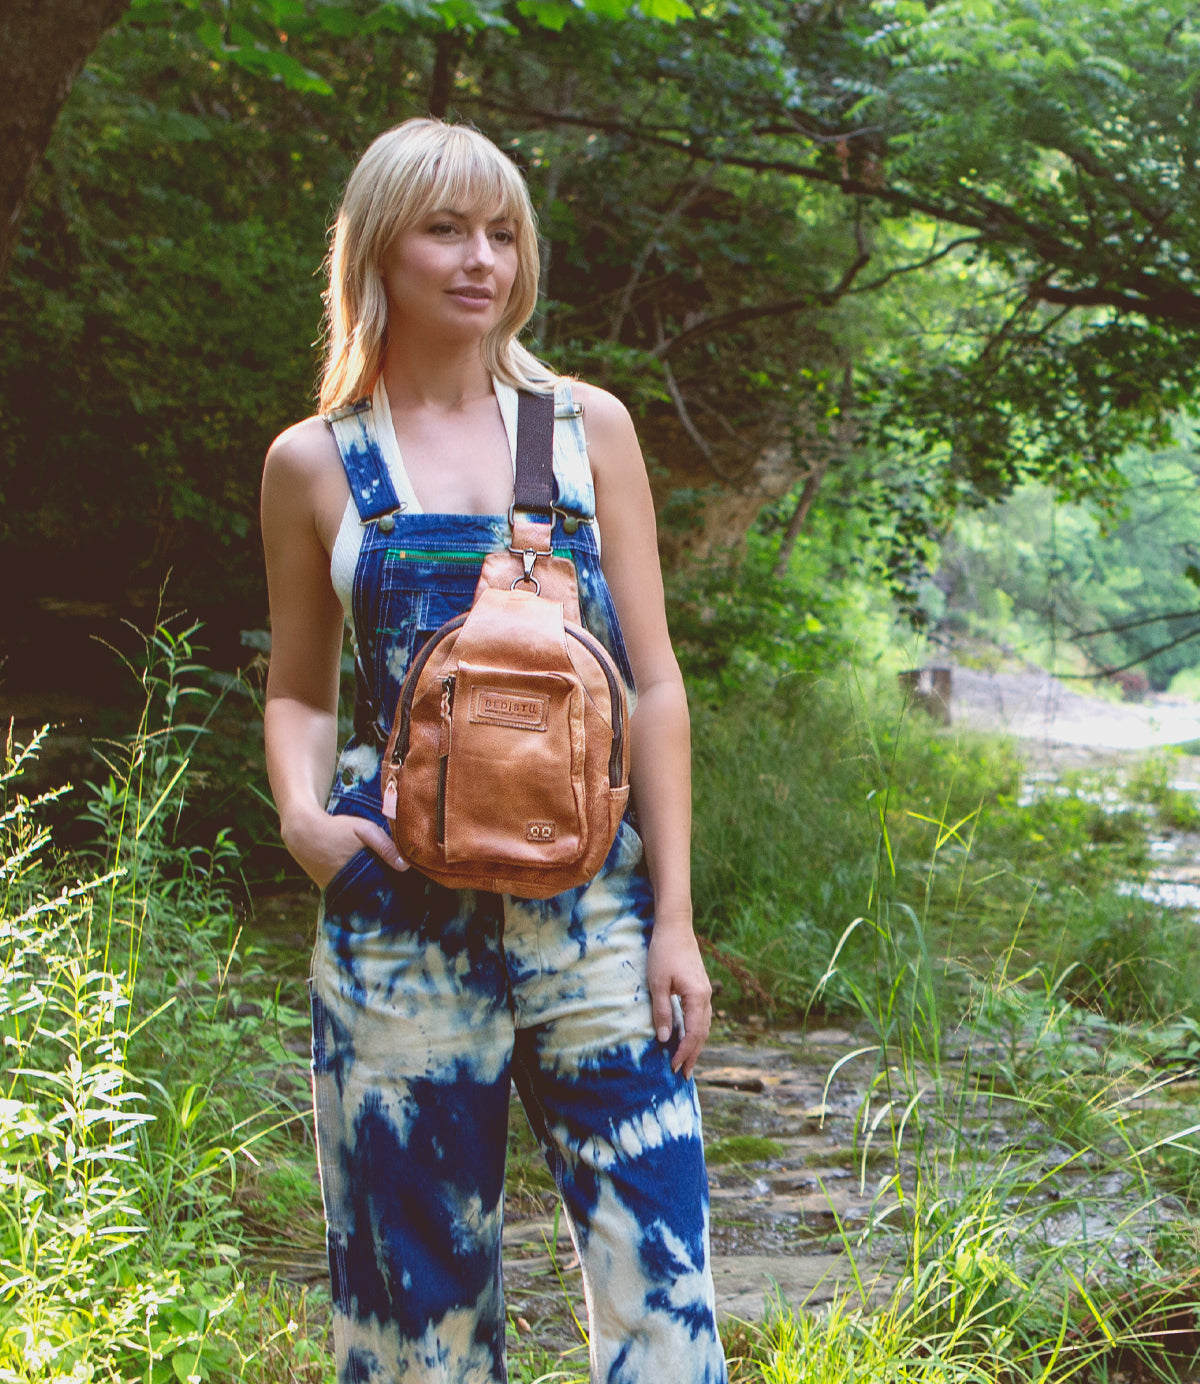 A woman in overalls standing in a wooded area with a Bed Stu Beau backpack.